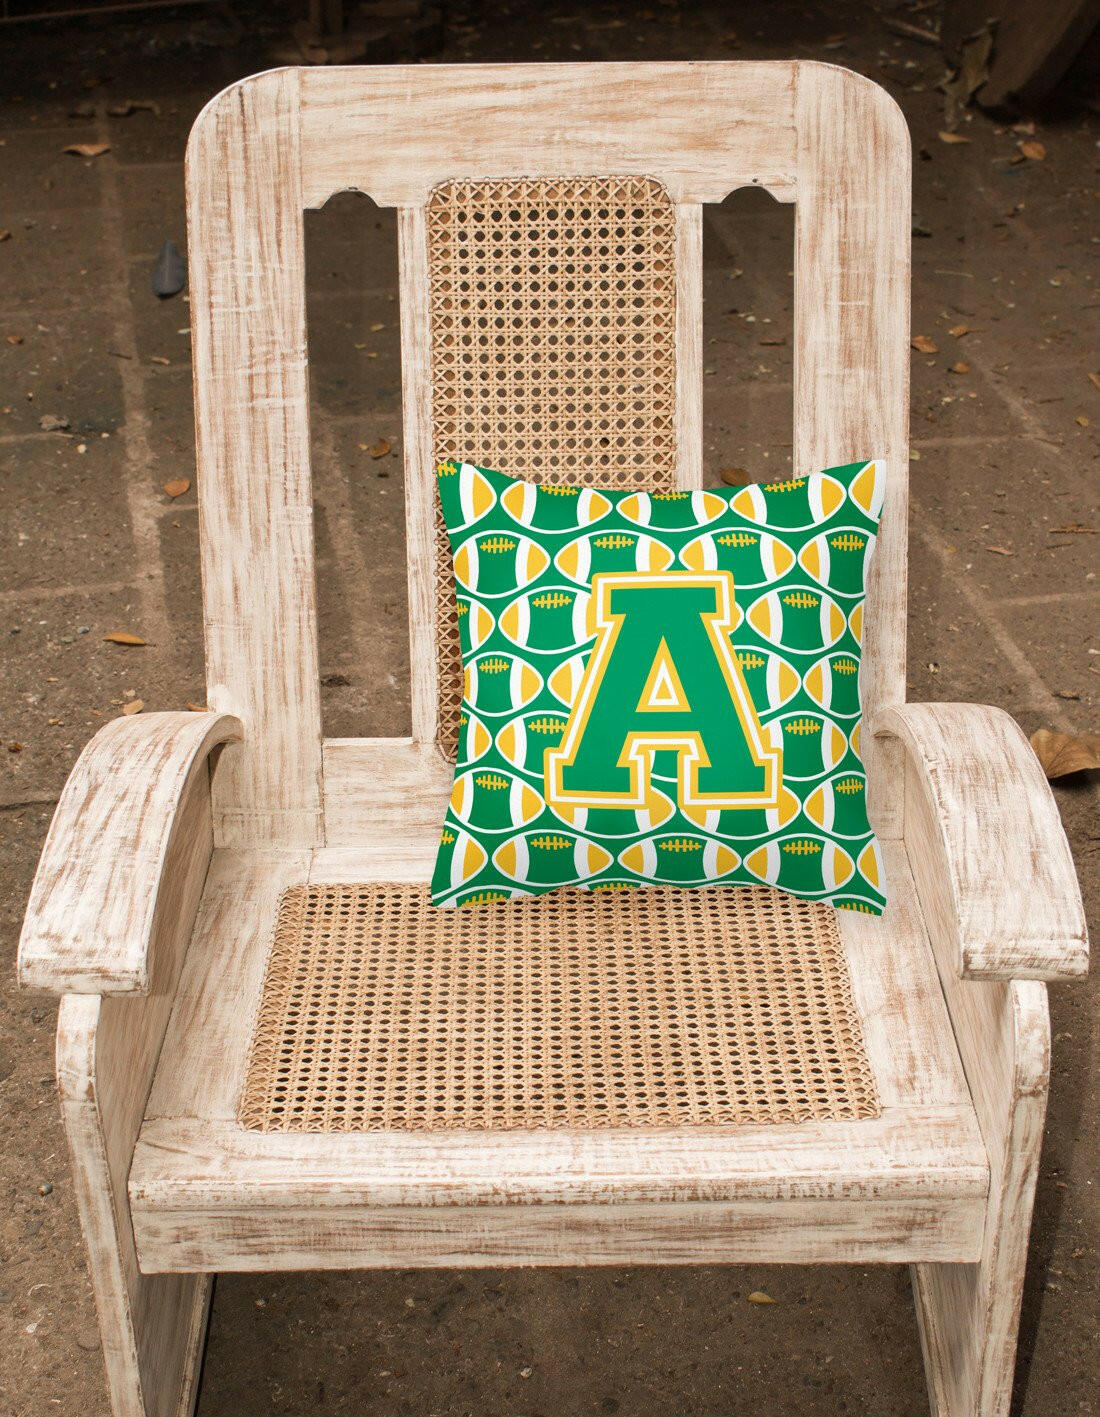 Letter A Football Green and Gold Fabric Decorative Pillow CJ1069-APW1414 by Caroline's Treasures